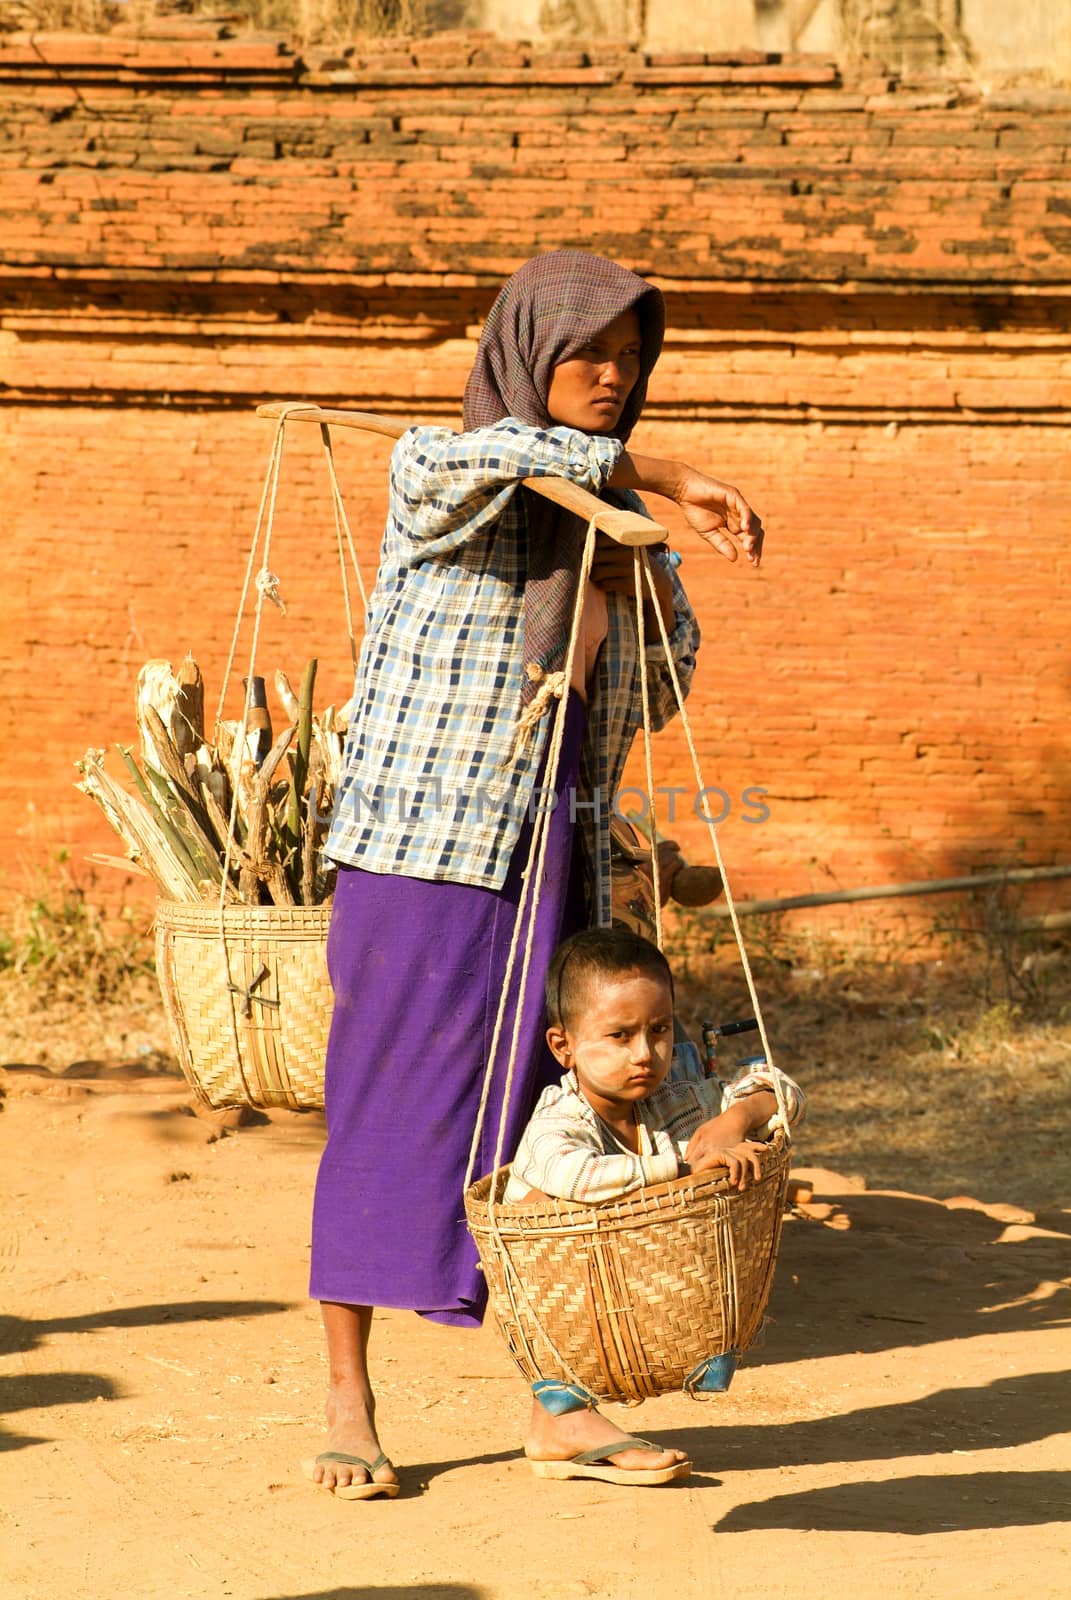 Bagan, Myanmar - 24 January 2010: Woman with her son on a basket at the archaeological site of Bagan on Myanmar